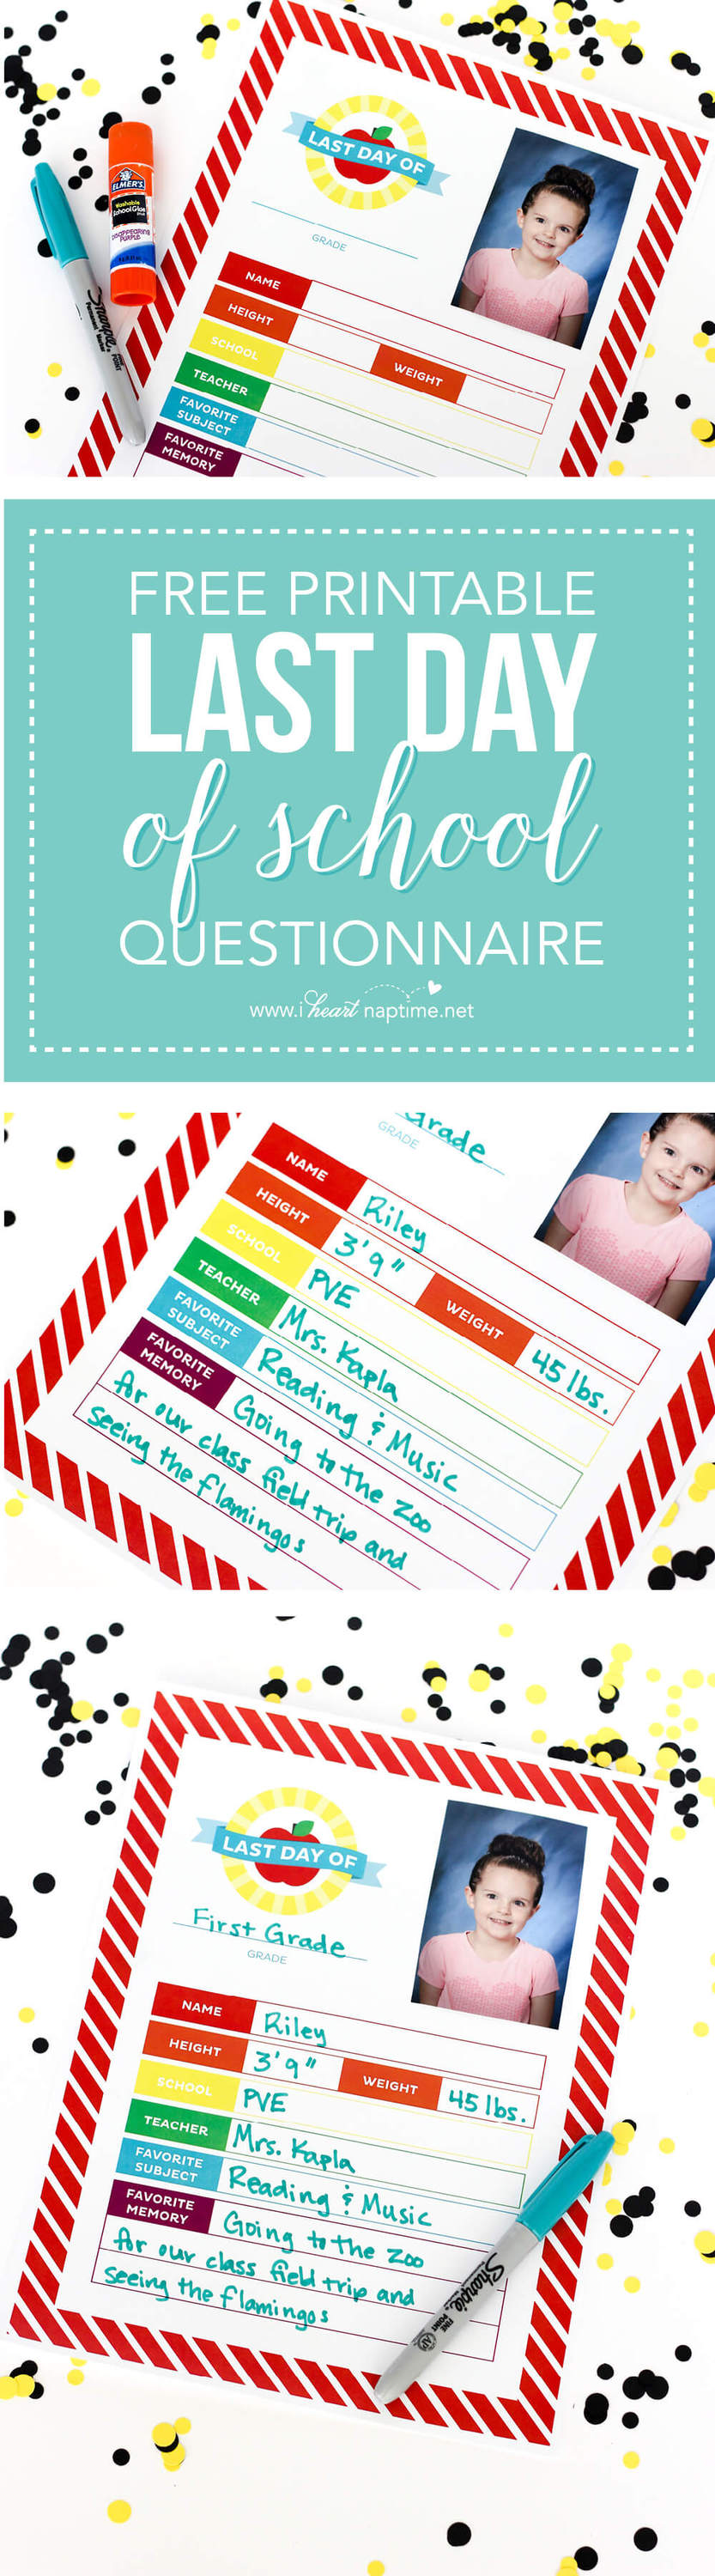 Last Day of School Questionnaire - this keepsake is a fun way to end the school year!